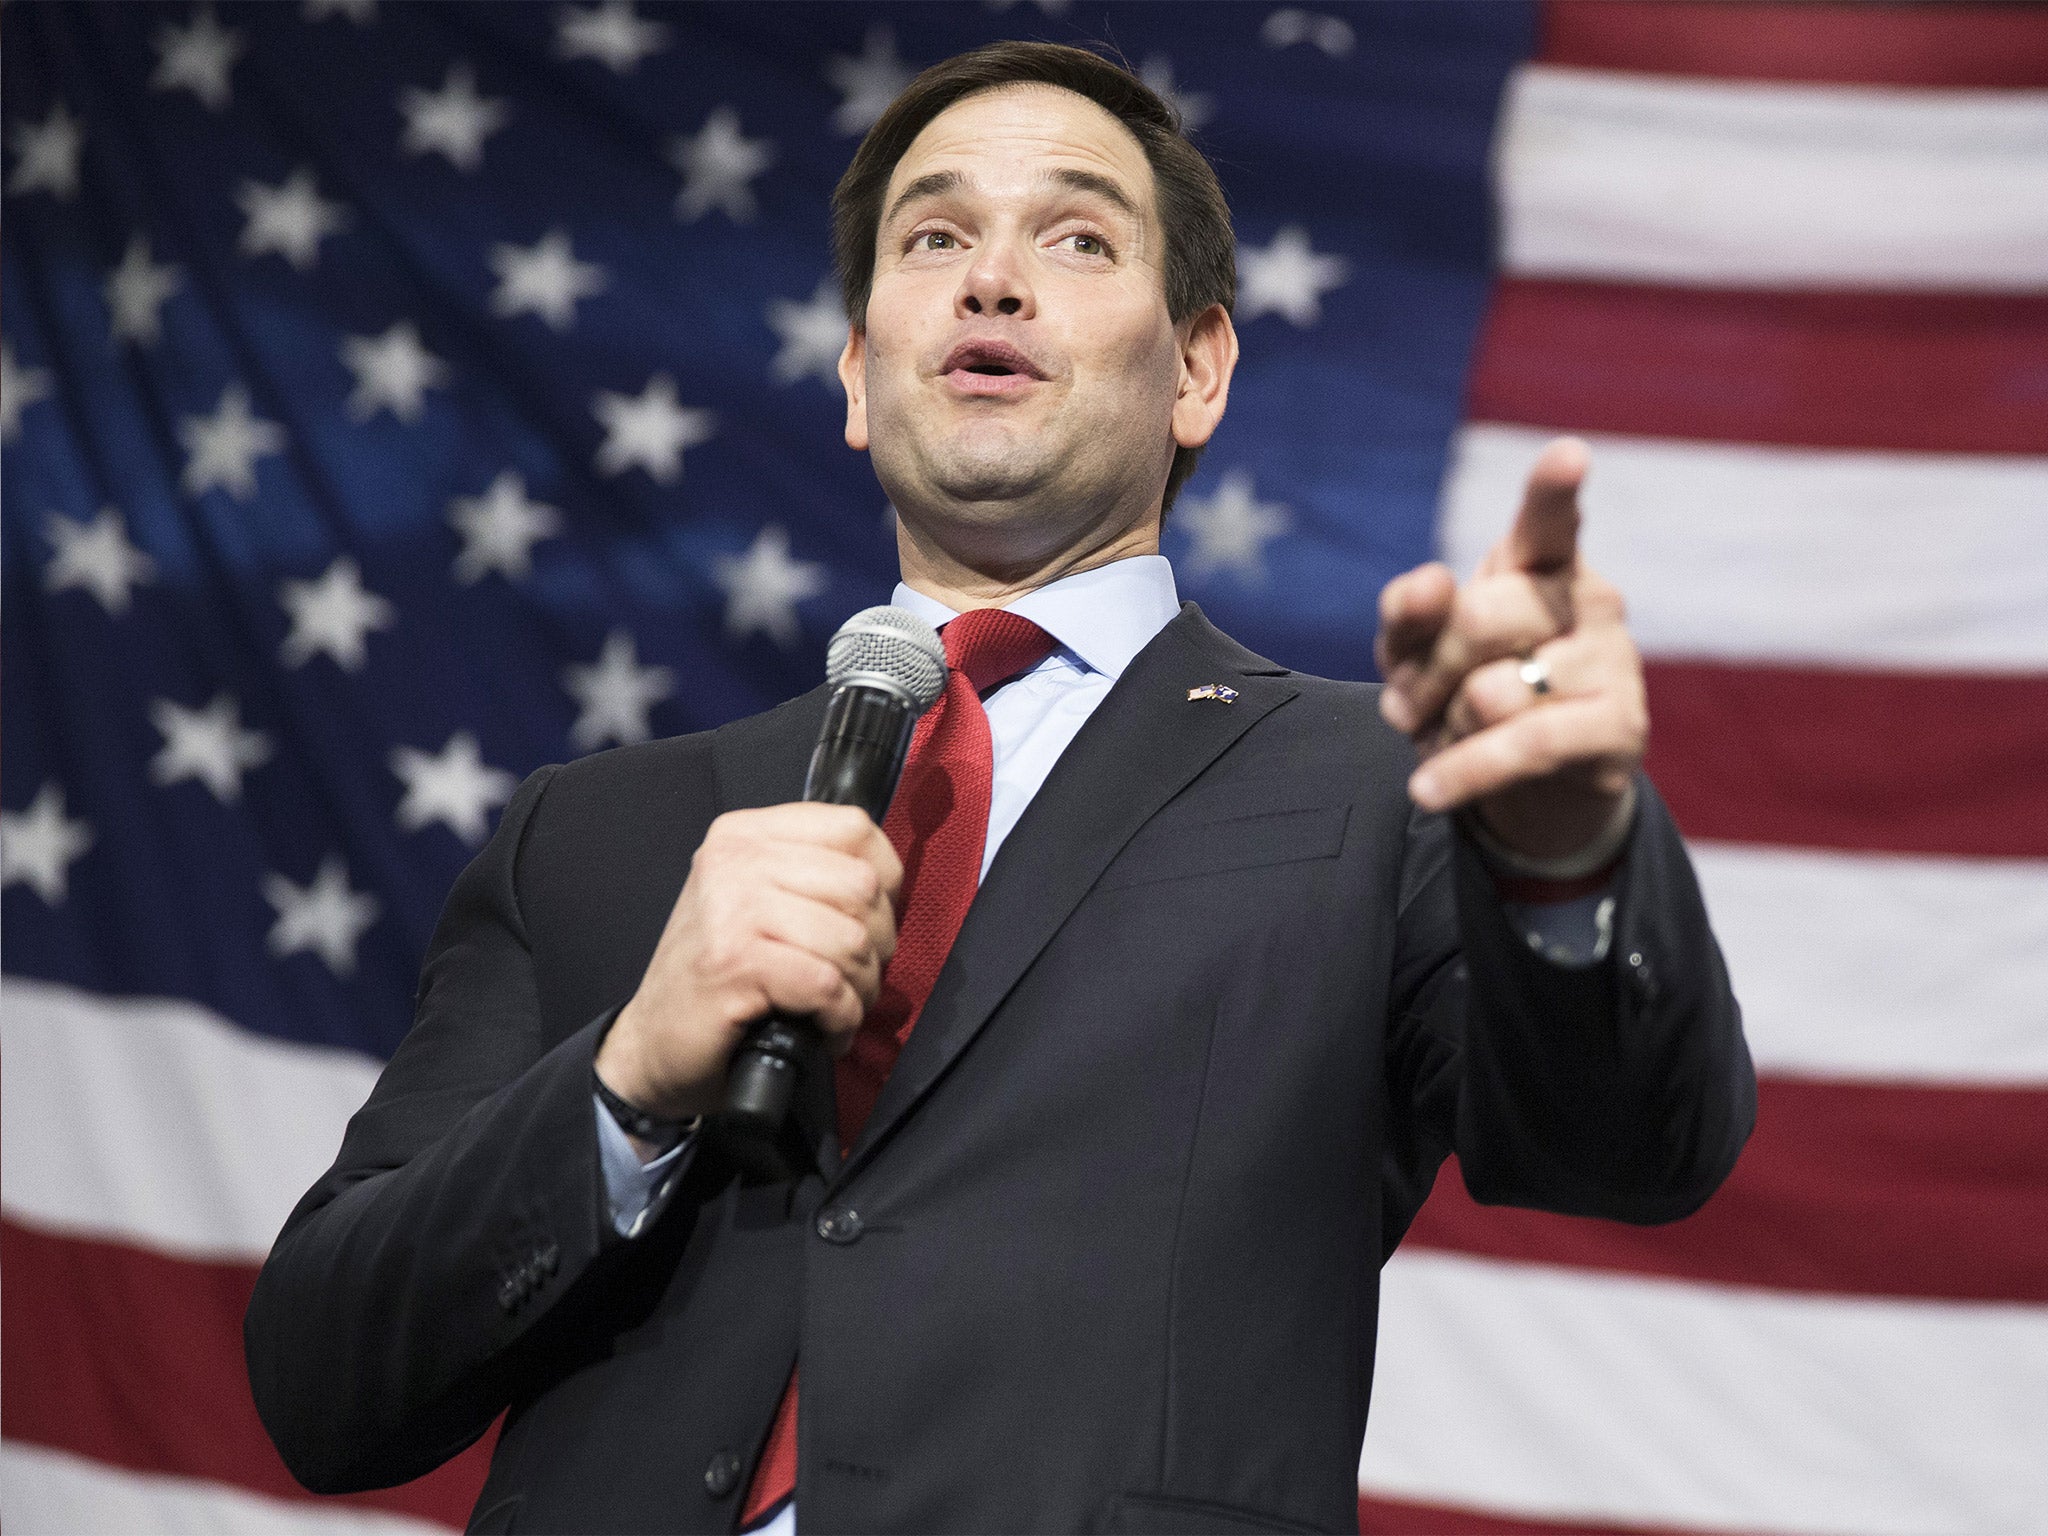 Republican presidential candidate Marco Rubio speaks at a rally in North Charleston, South Carolina, on Friday